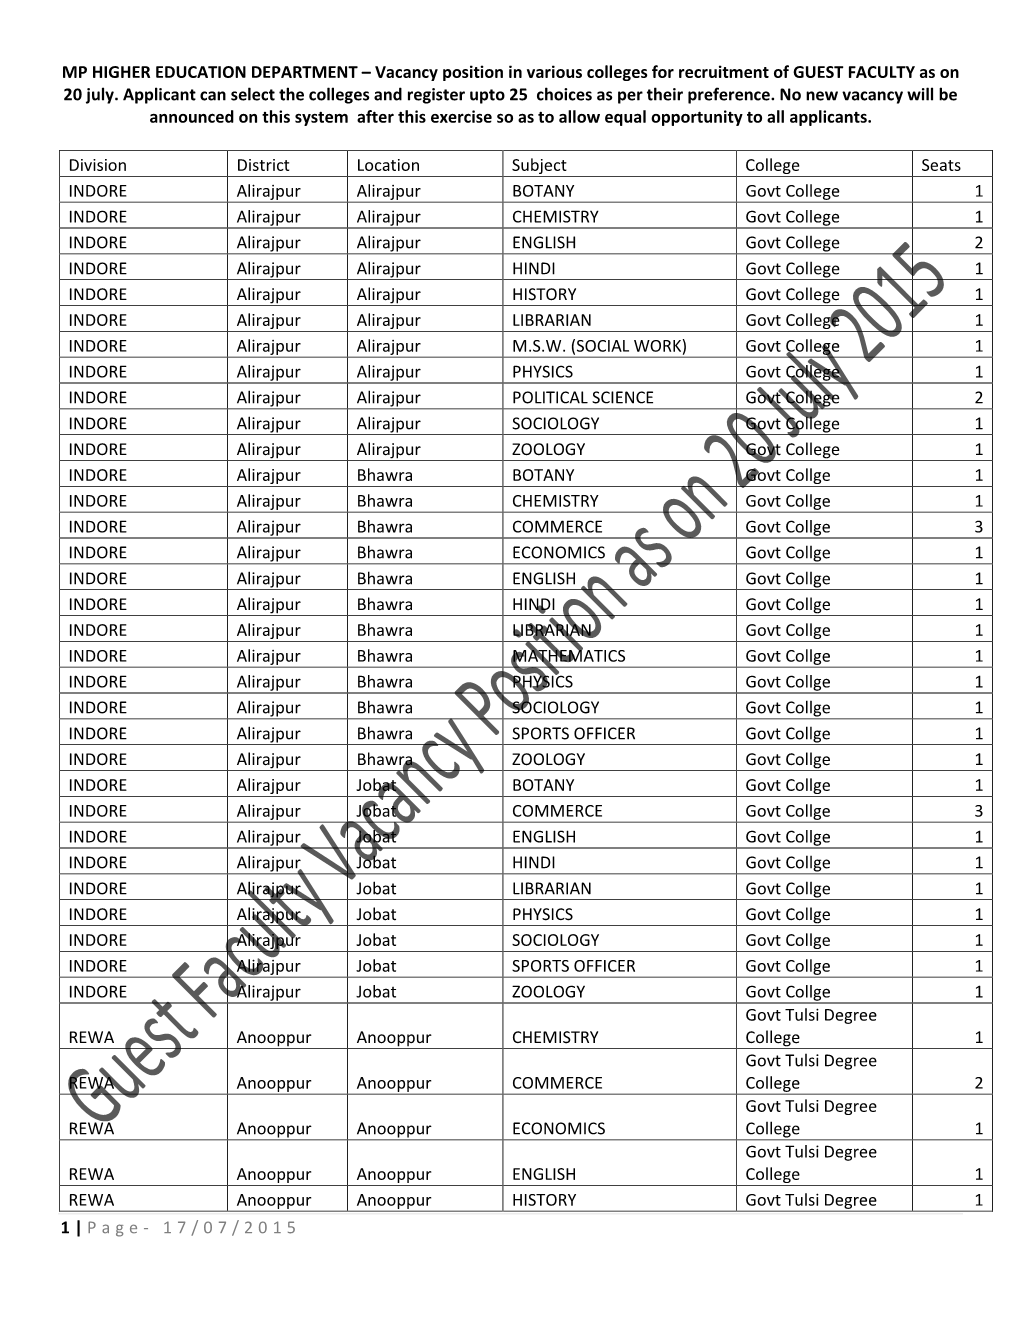 Vacancy Position in Various Colleges for Recruitment of GUEST FACULTY As on 20 July